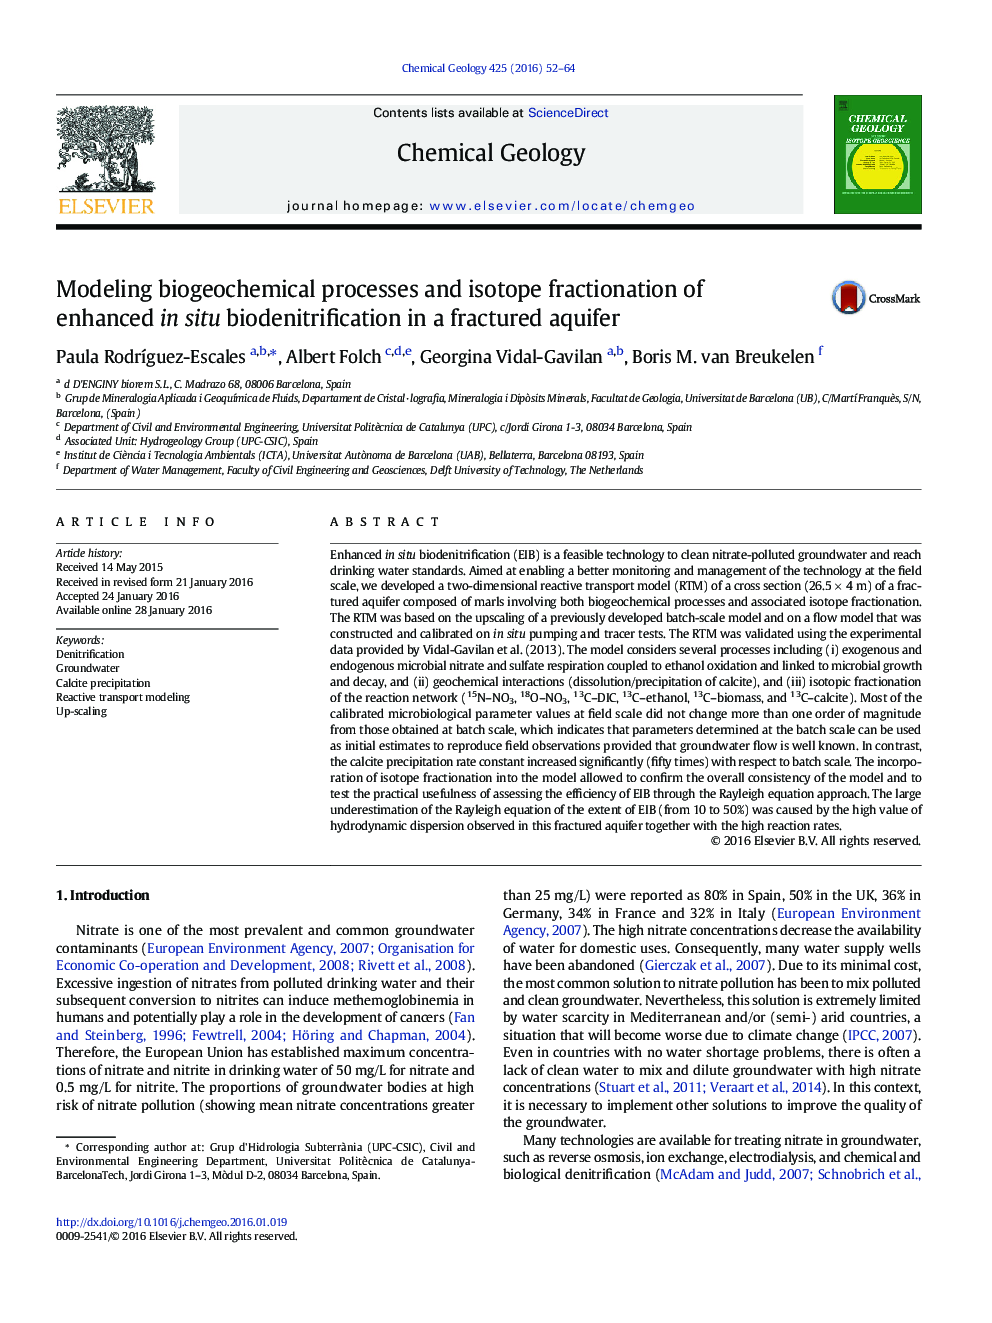 Modeling biogeochemical processes and isotope fractionation of enhanced in situ biodenitrification in a fractured aquifer